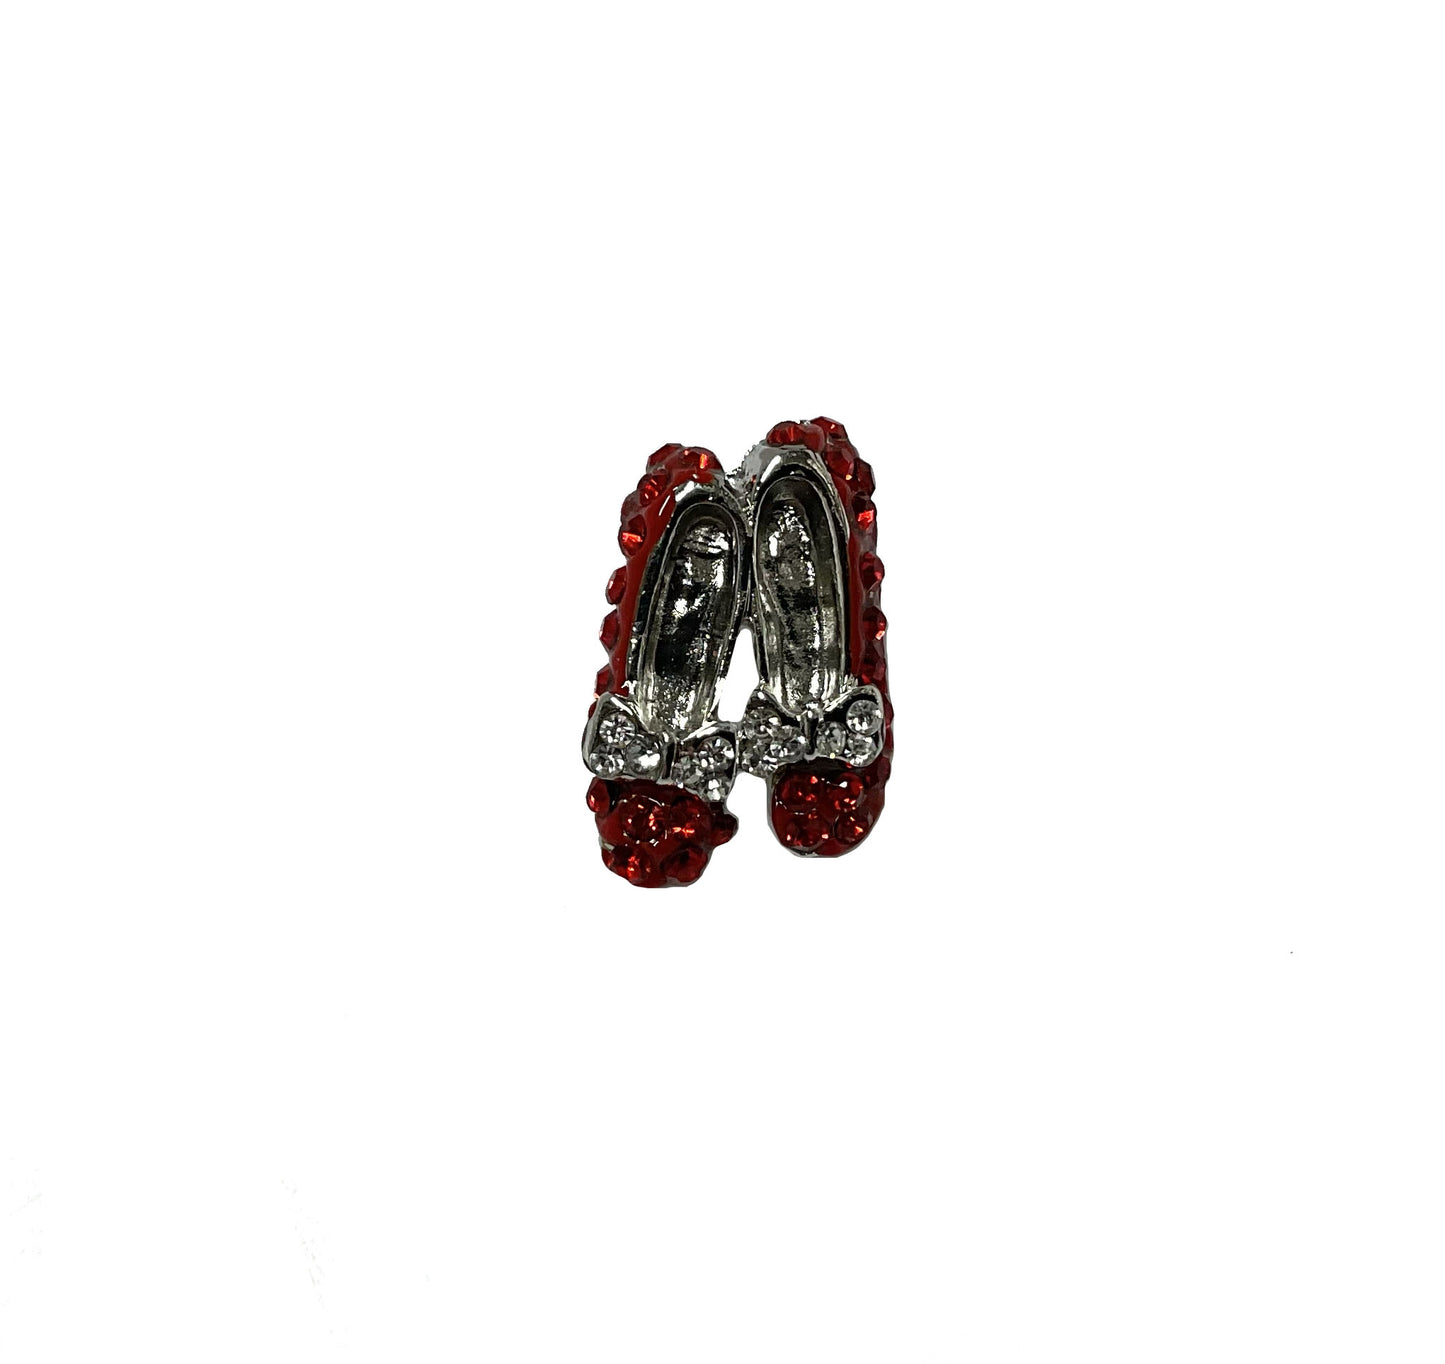 Ruby Slippers Tack Pin #28-110380